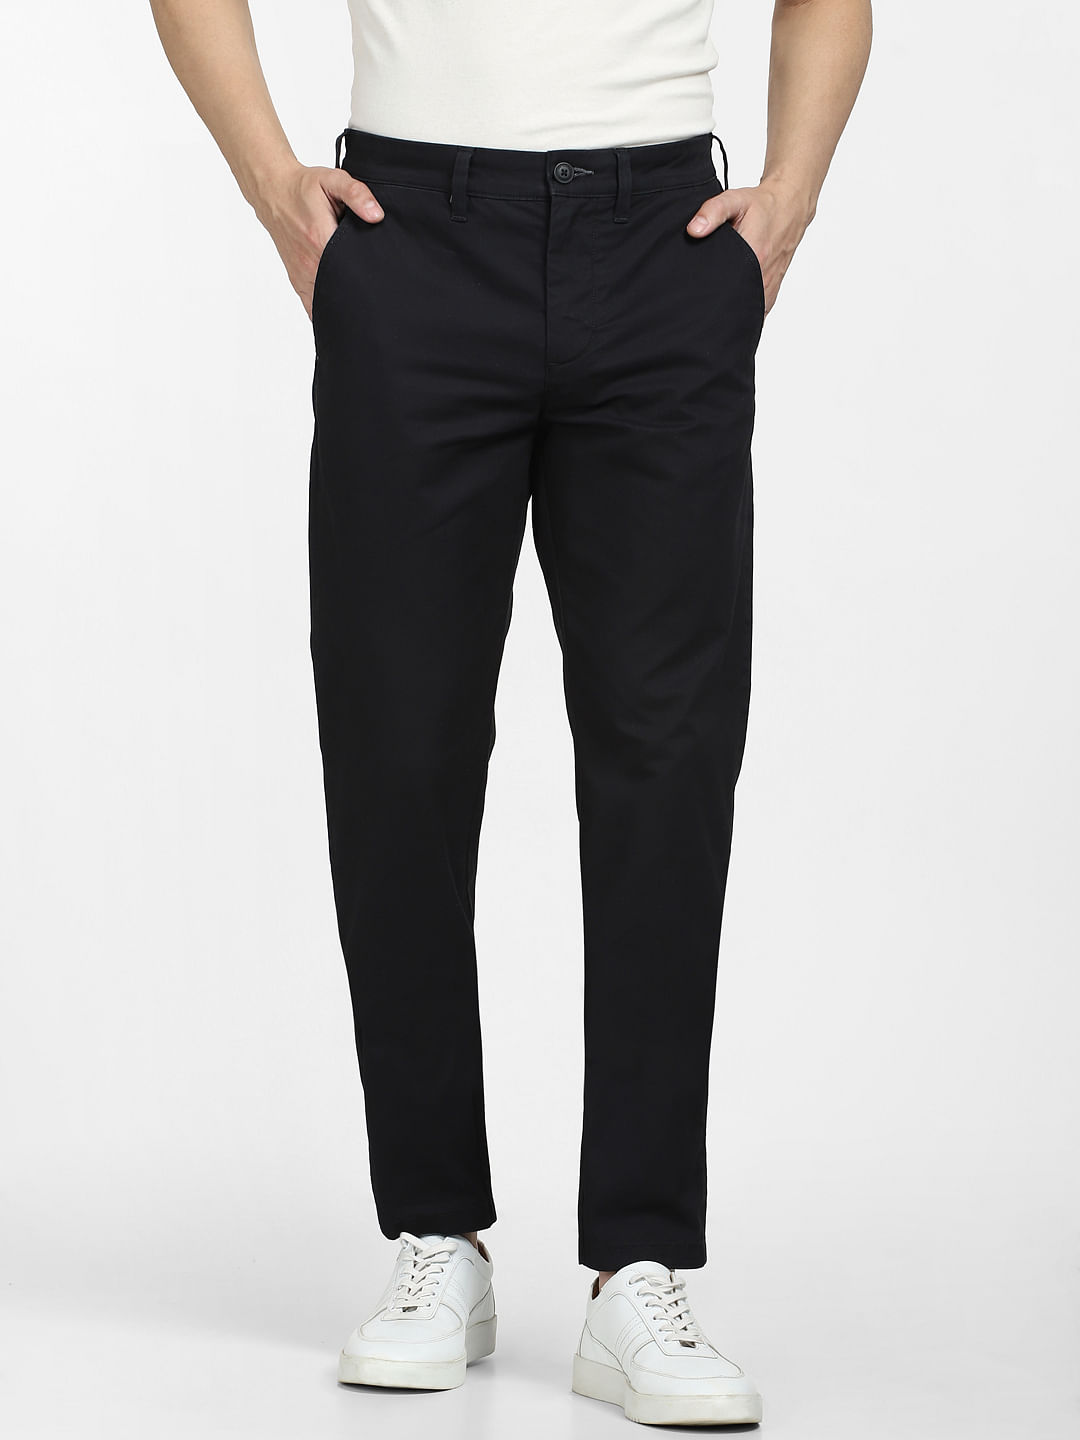 Buy Skinny Fit AnkleLength Chinos Online at Best Prices in India  JioMart